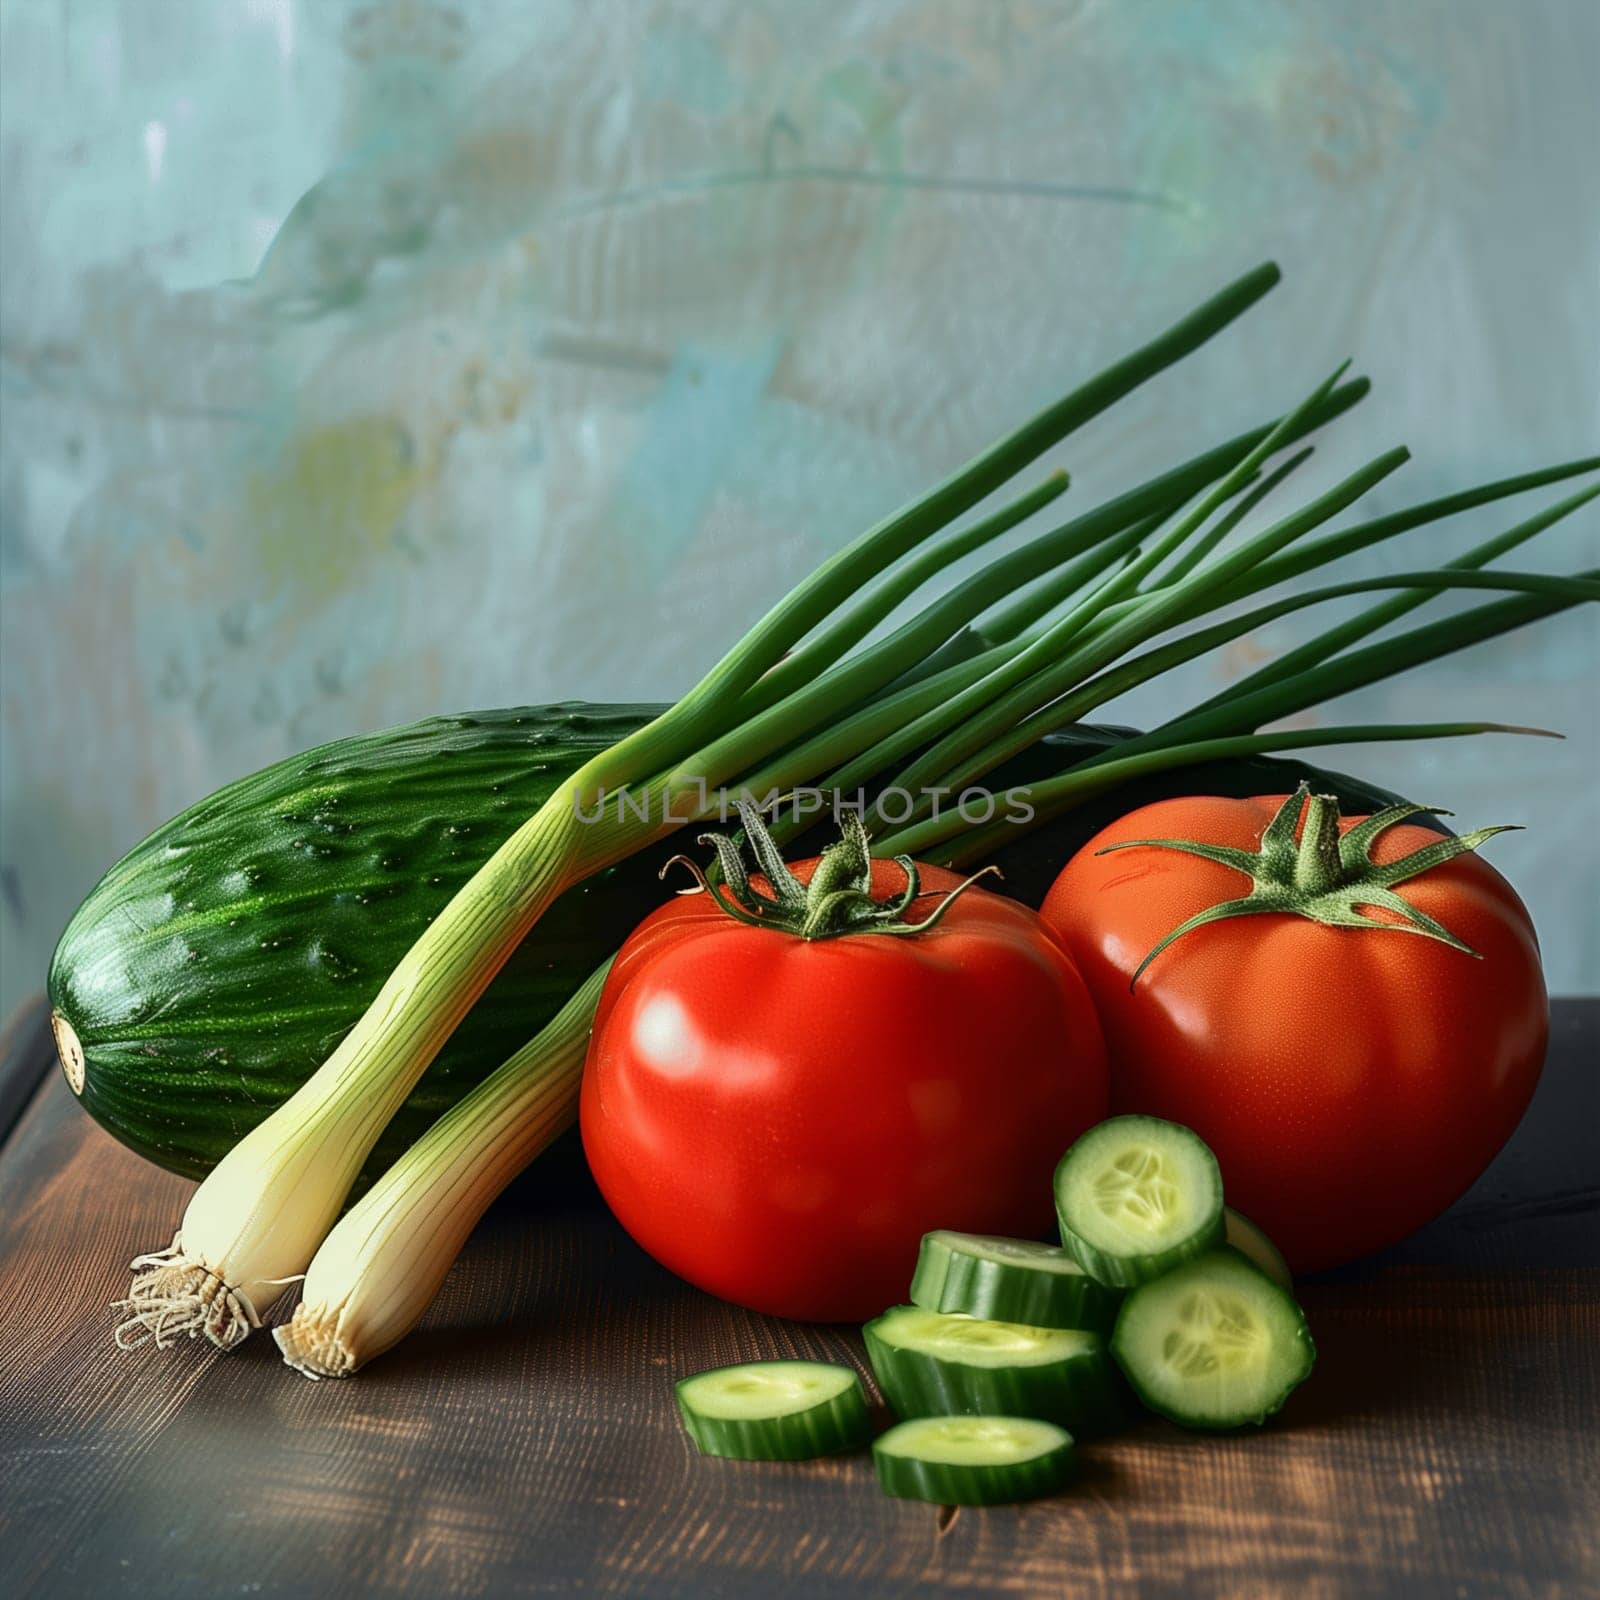 Ripe tomatoes, sliced cucumber, and vibrant green onions arranged on a rustic wooden table, showcasing fresh produce.